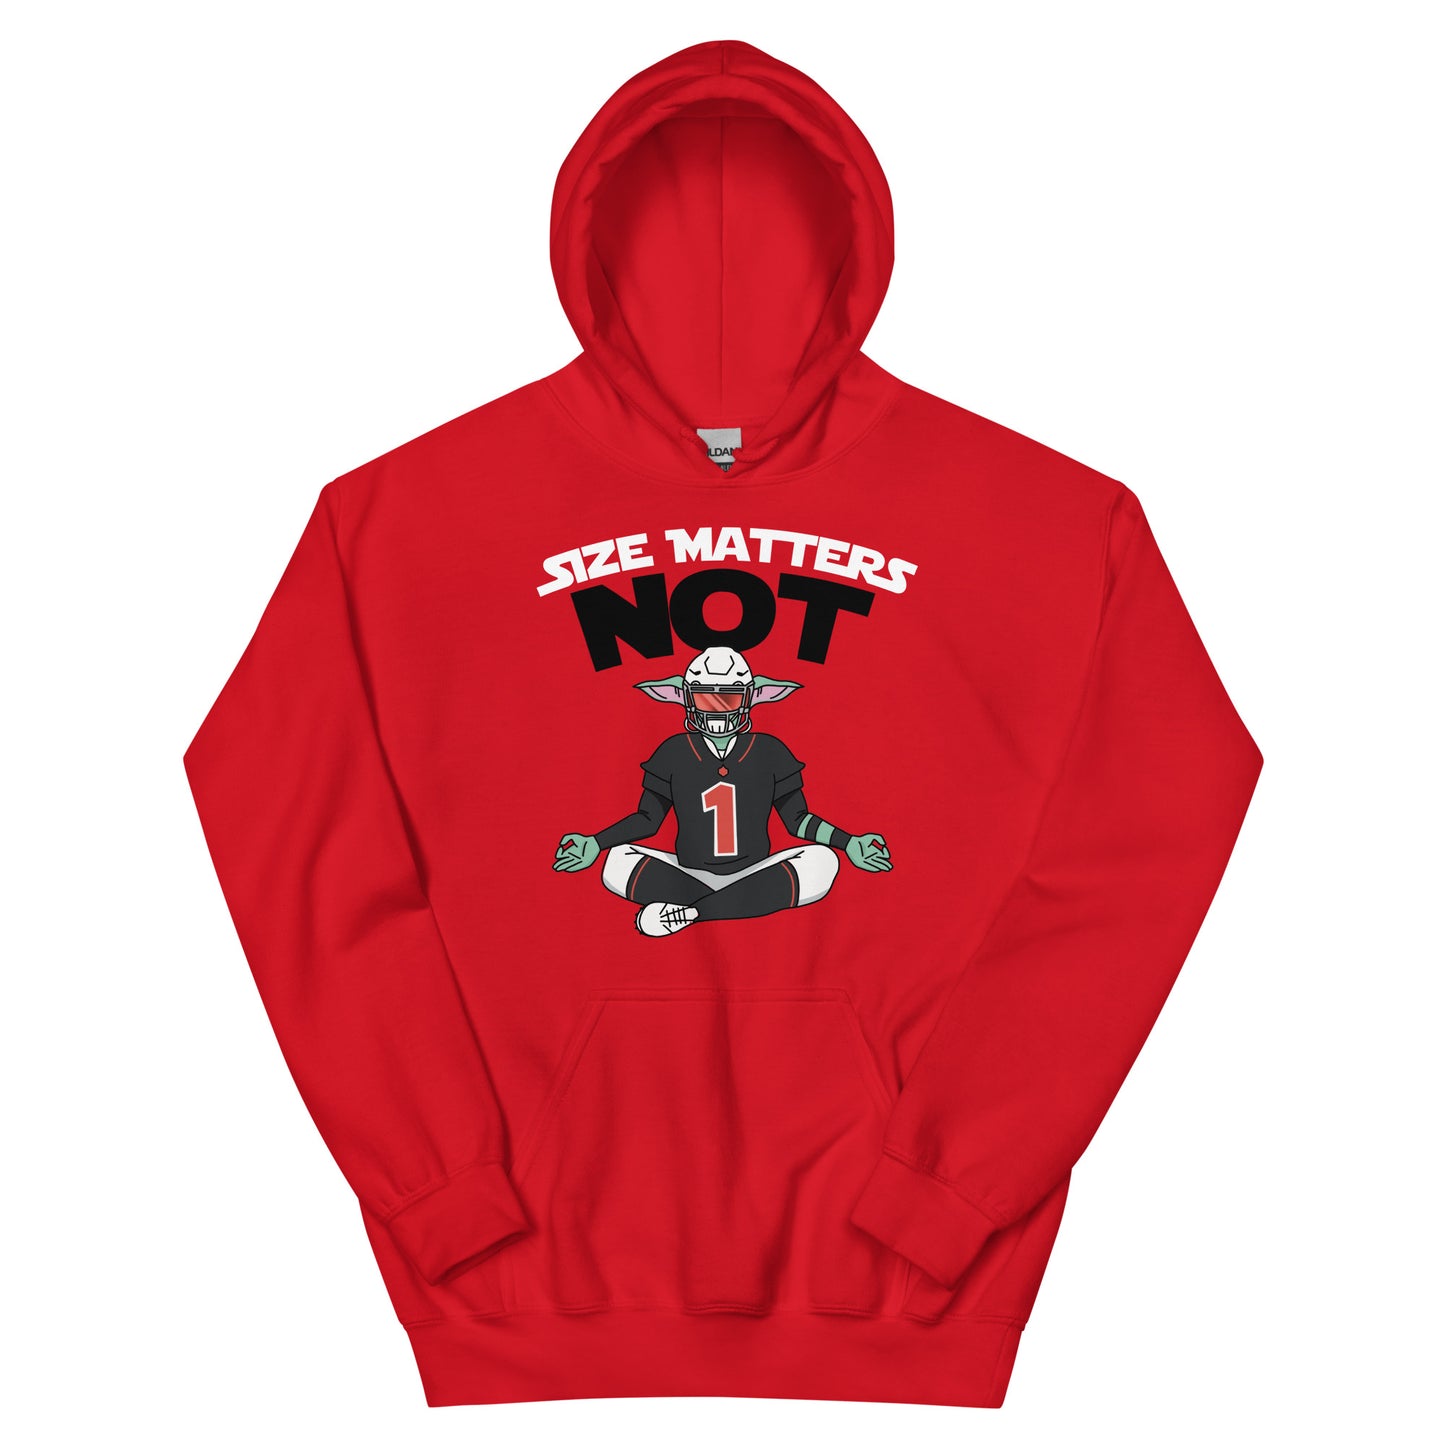 TFG "Size Matters Not" Unisex Hoodie